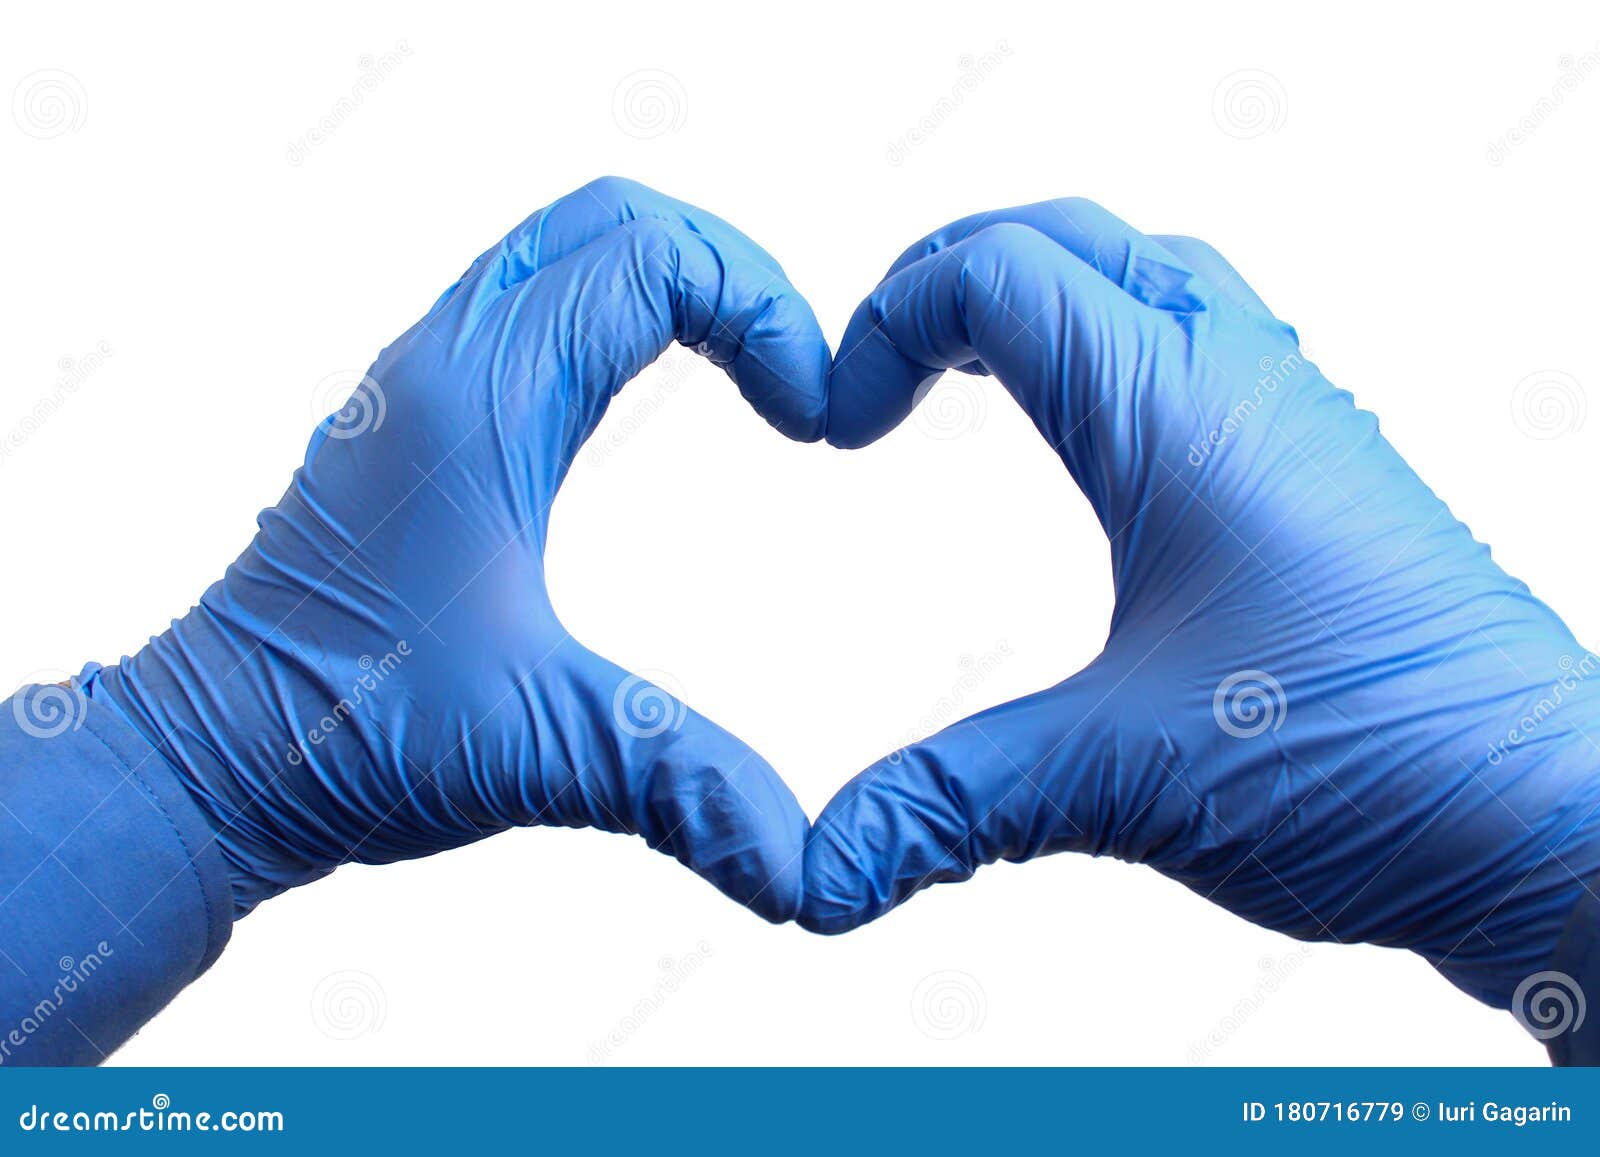 Hands in Medical Gloves Depict a Heart on a White Background, Isolated ...